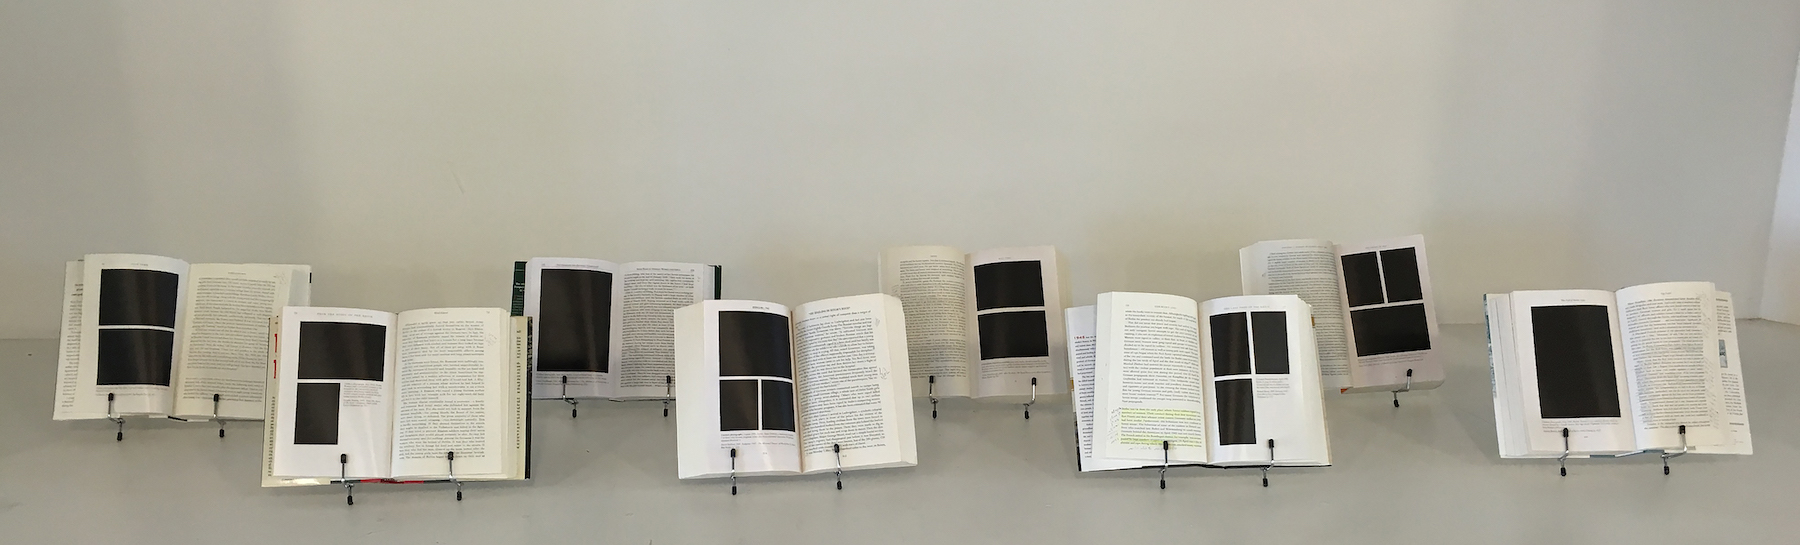 An installation view of eight copies of the same book opened to different pages, displaying different blacked out photographs and text.